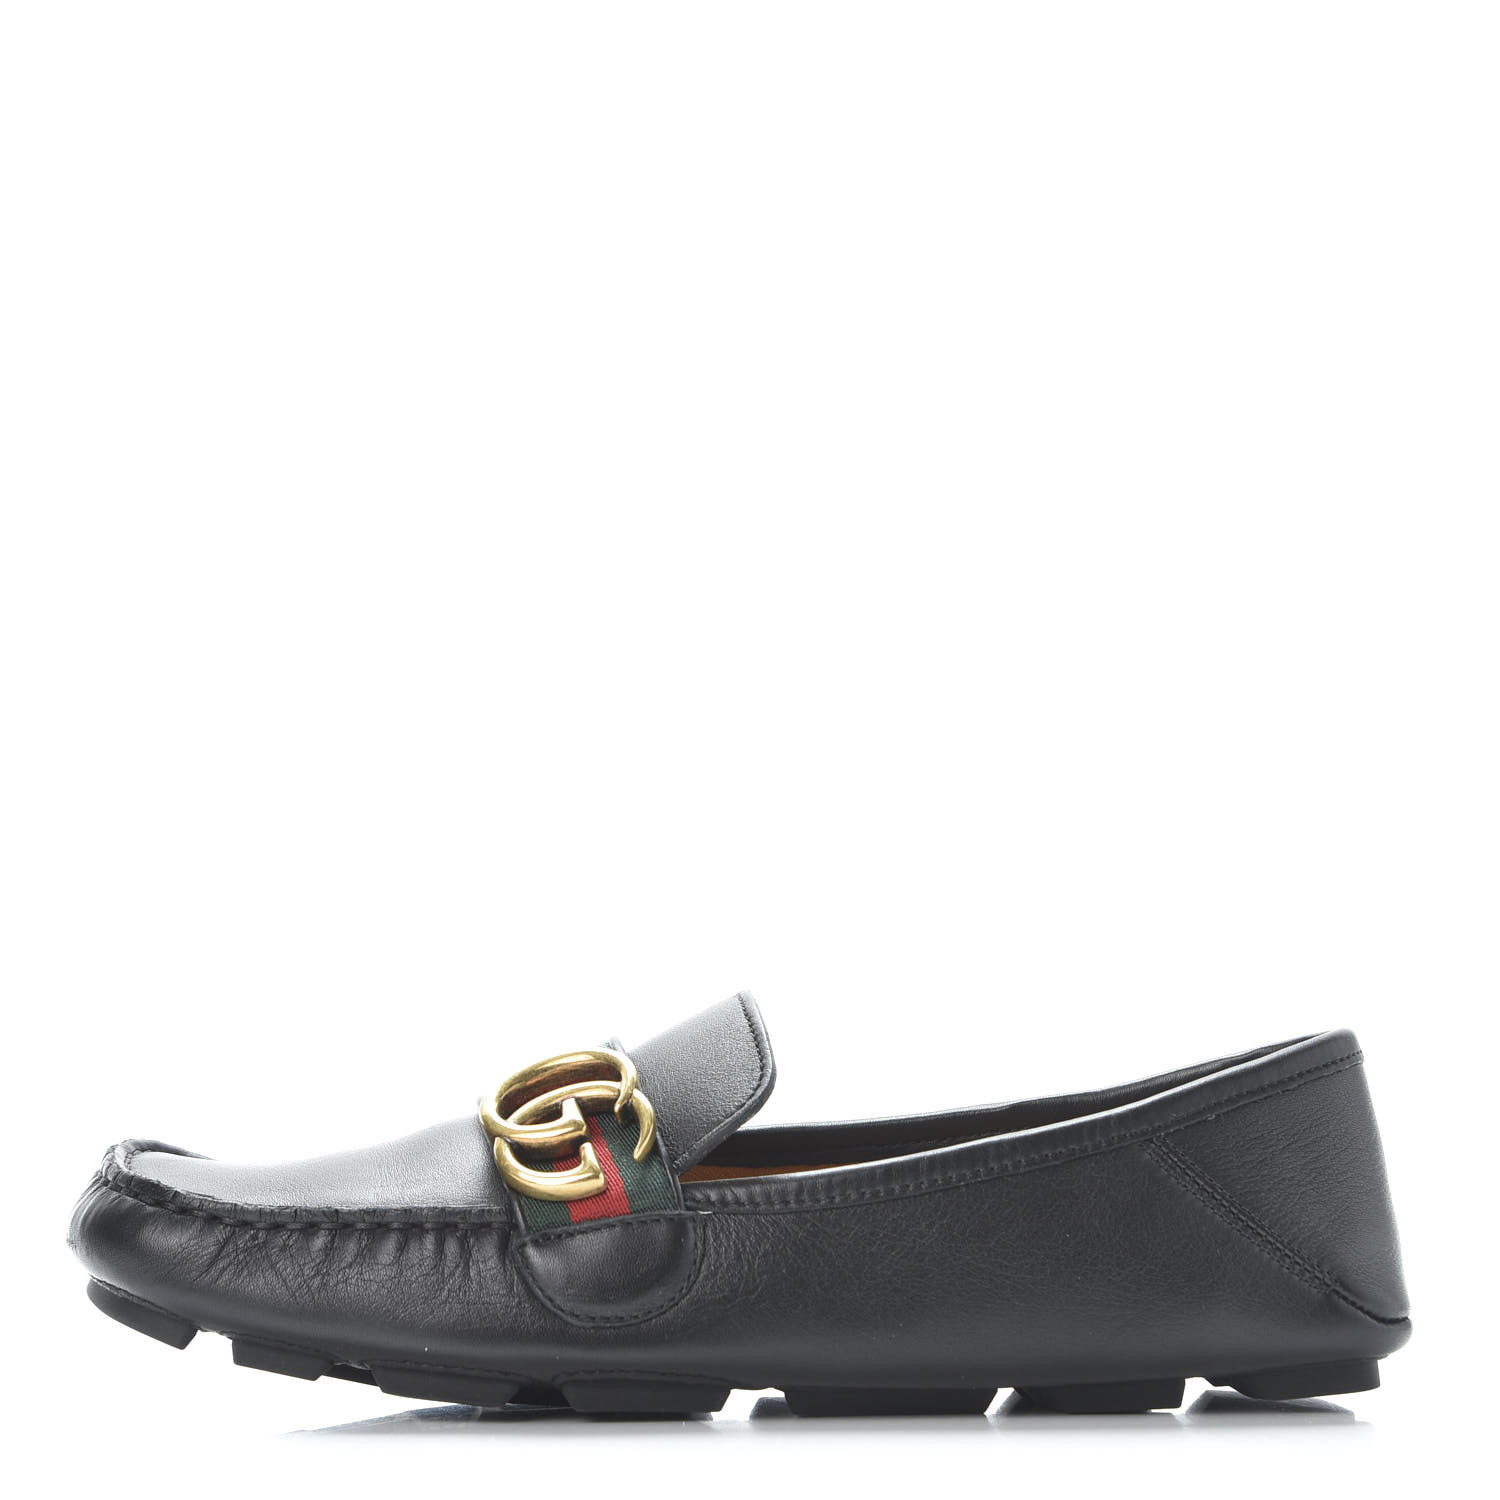 womens black driving loafers